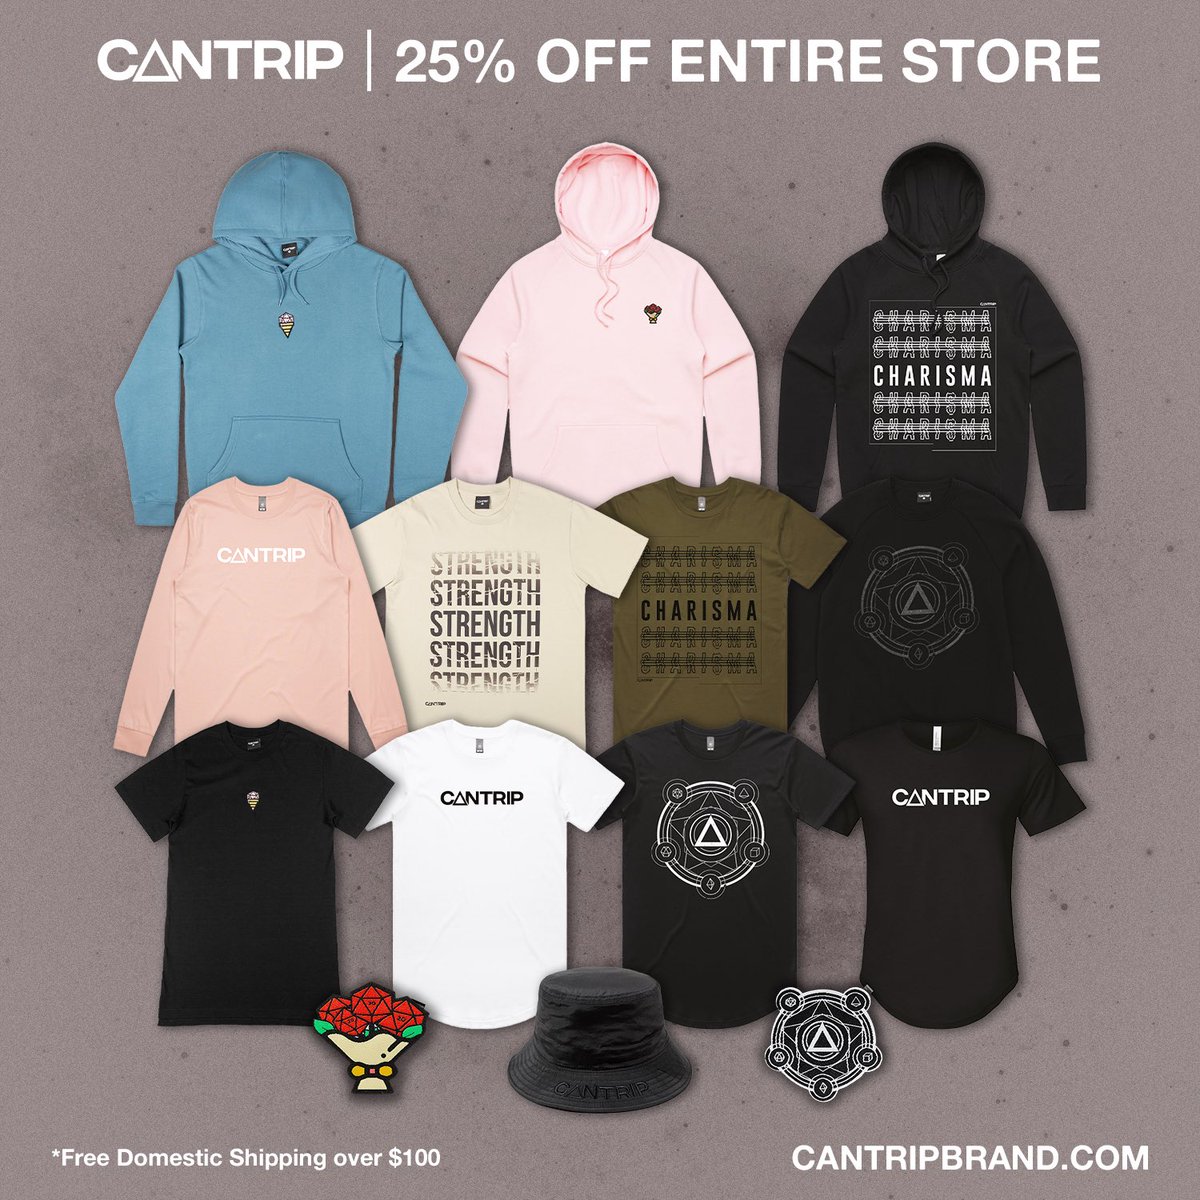 No surprise round here, just savings. 25% off anything in the store - including limited “play test” items - and free domestic shipping on orders over $100. Some of these items won’t be restocked, so be sure to loot thoroughly! cantripbrand.com #cantripstyle